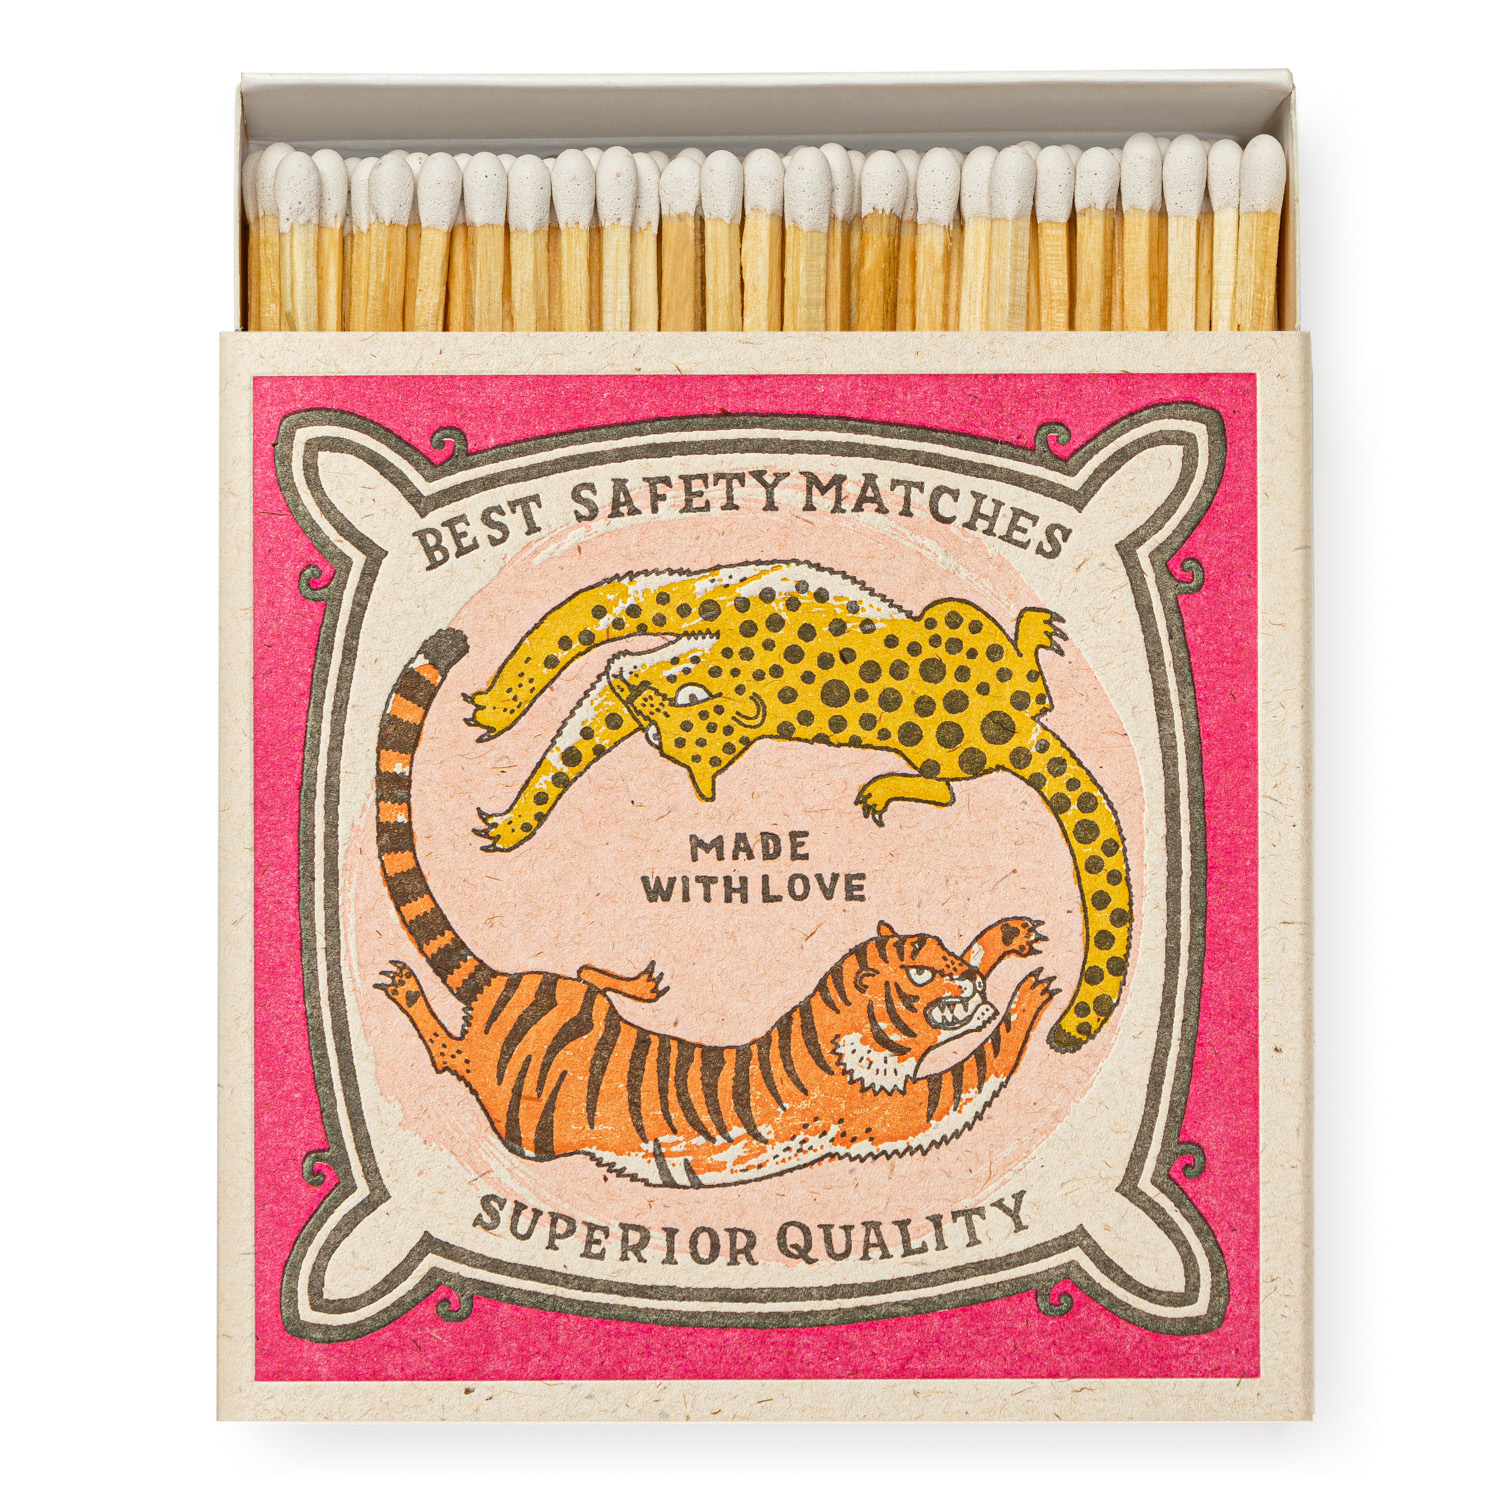 Chasing Big Cats - Square Matchboxes - Charlotte Farmer - from Archivist Gallery view